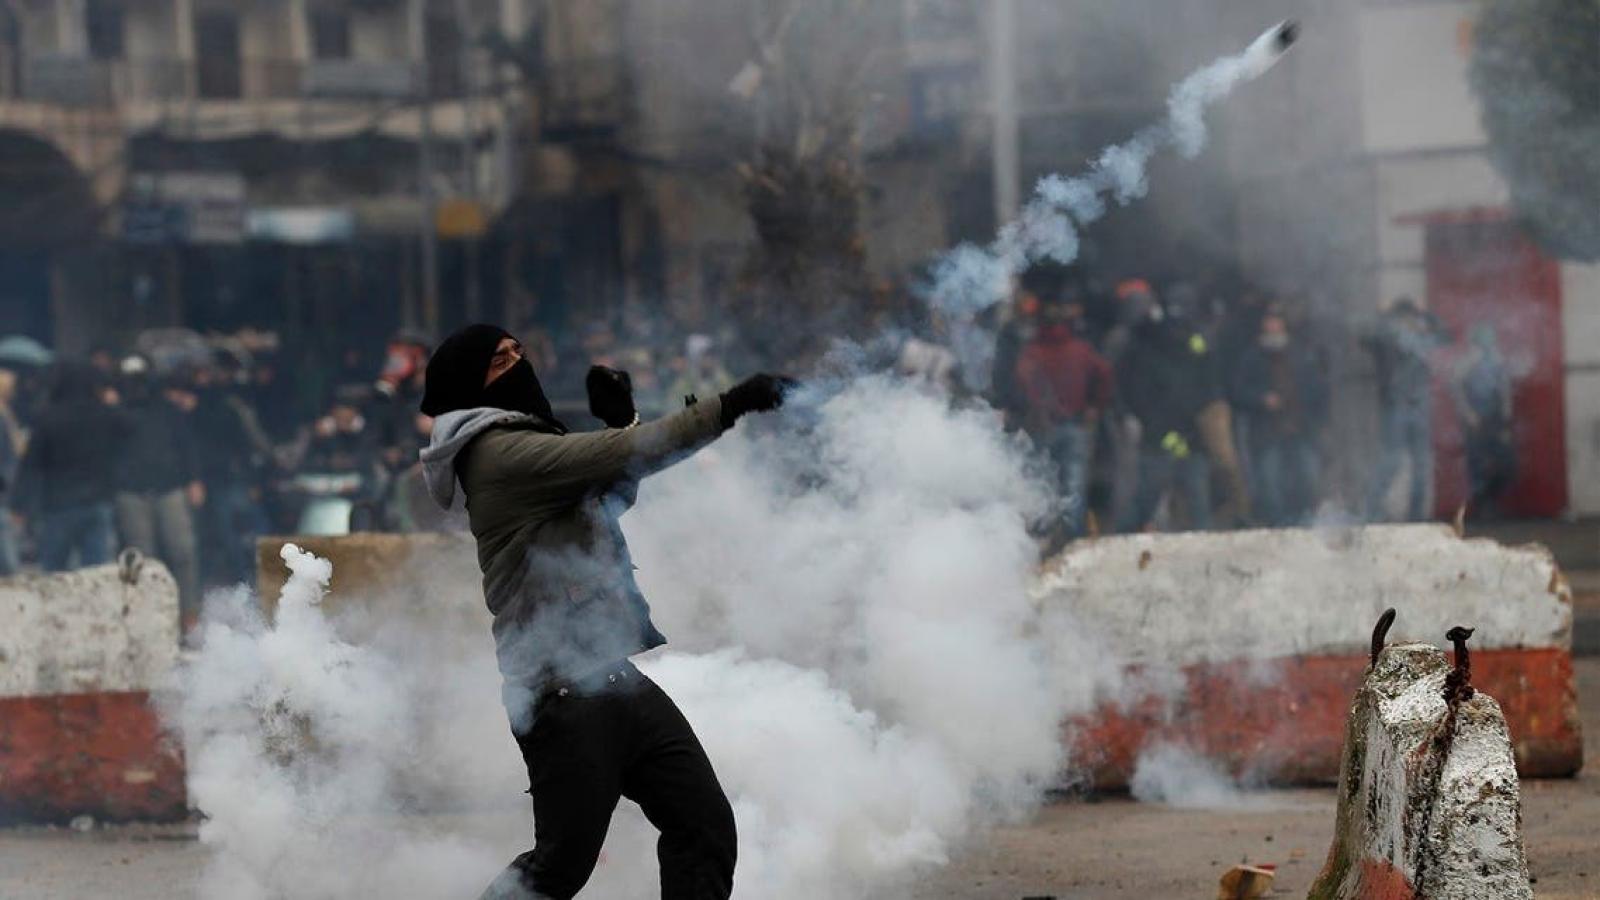 A protester throws back a tear gas canister towards riot policemen during a protest deteriorating living conditions and strict coronavirus lockdown measures, in Tripoli, Al-Arabiya News, January 28, 2021.